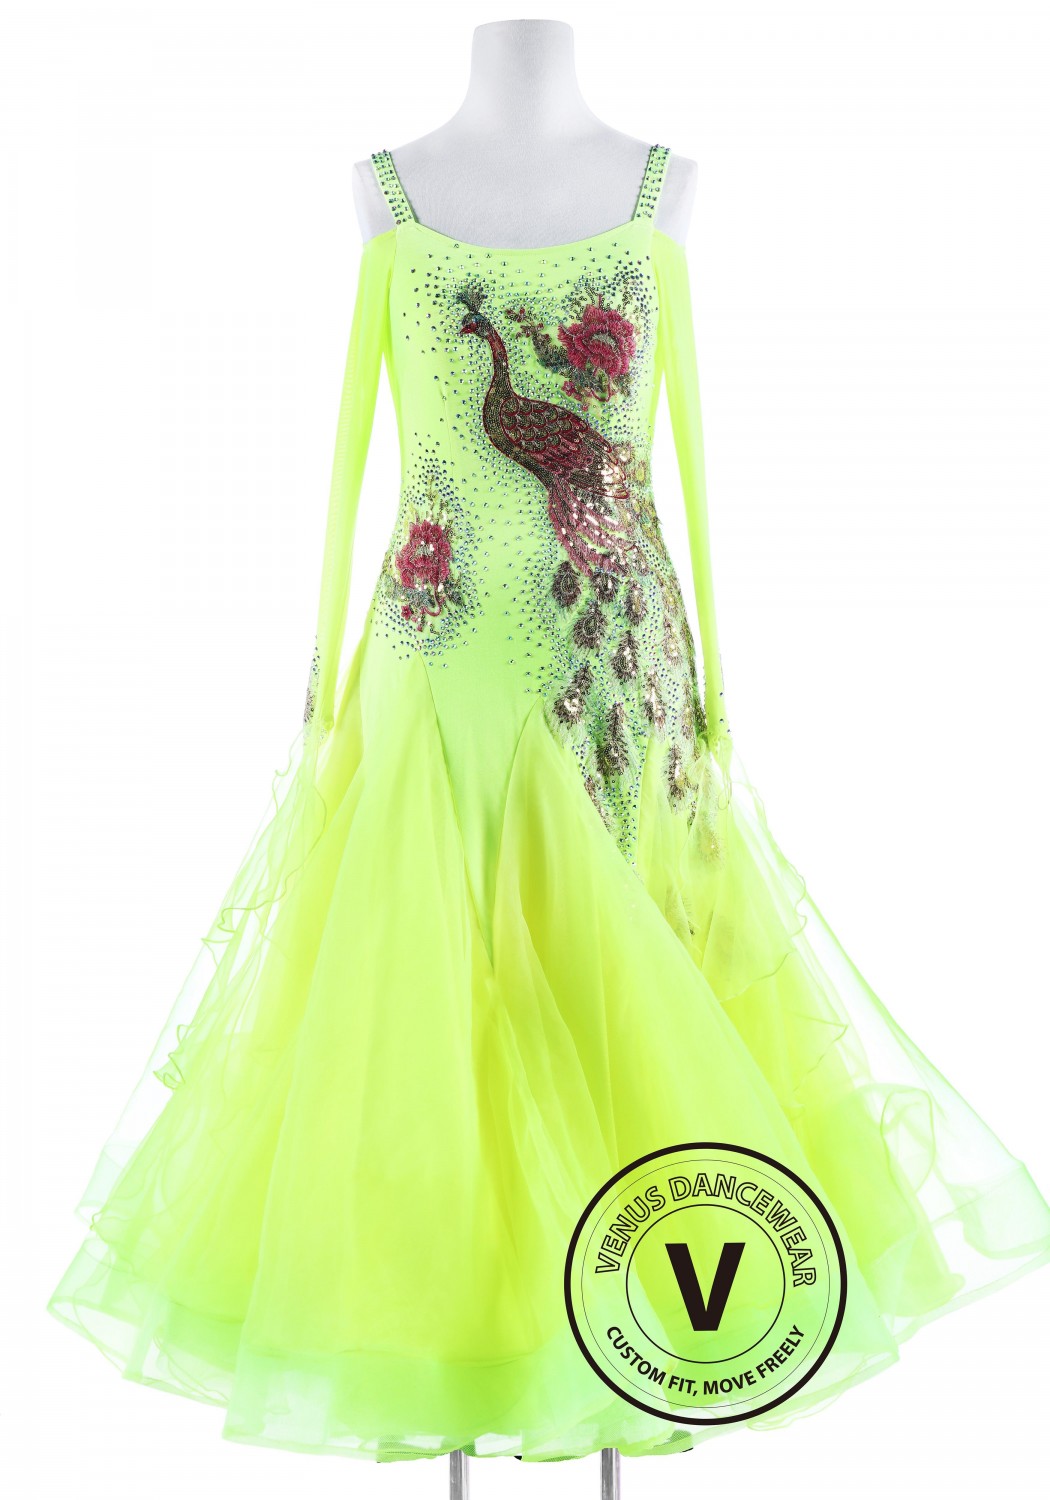 Neon Green Peacock Standard Competition Dance Dress